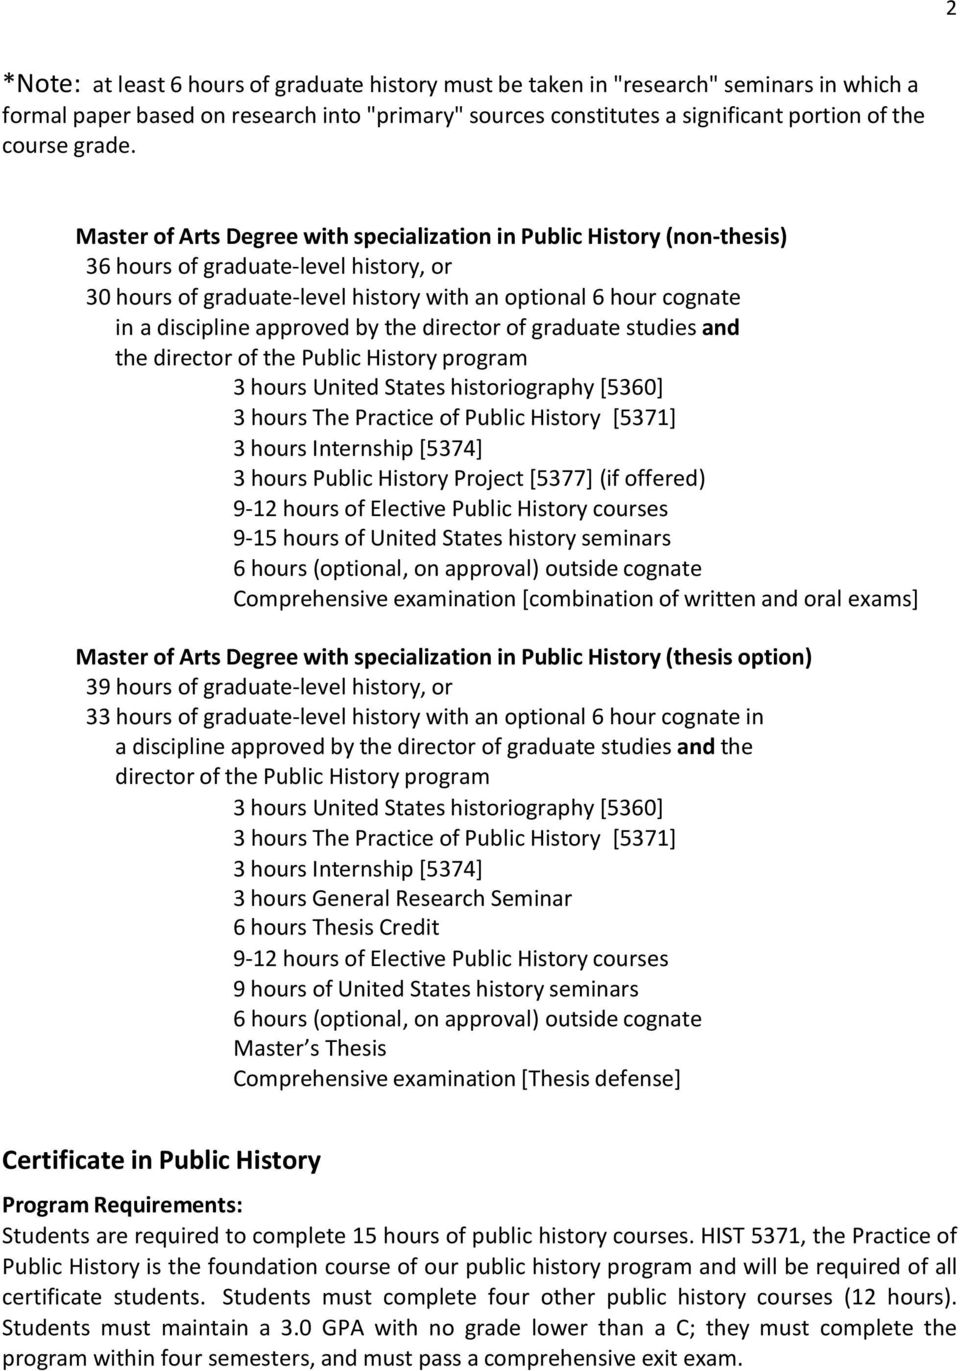 Master of Arts Degree with specialization in Public History (non-thesis) 36 hours of graduate-level history, or 30 hours of graduate-level history with an optional 6 hour cognate in a discipline